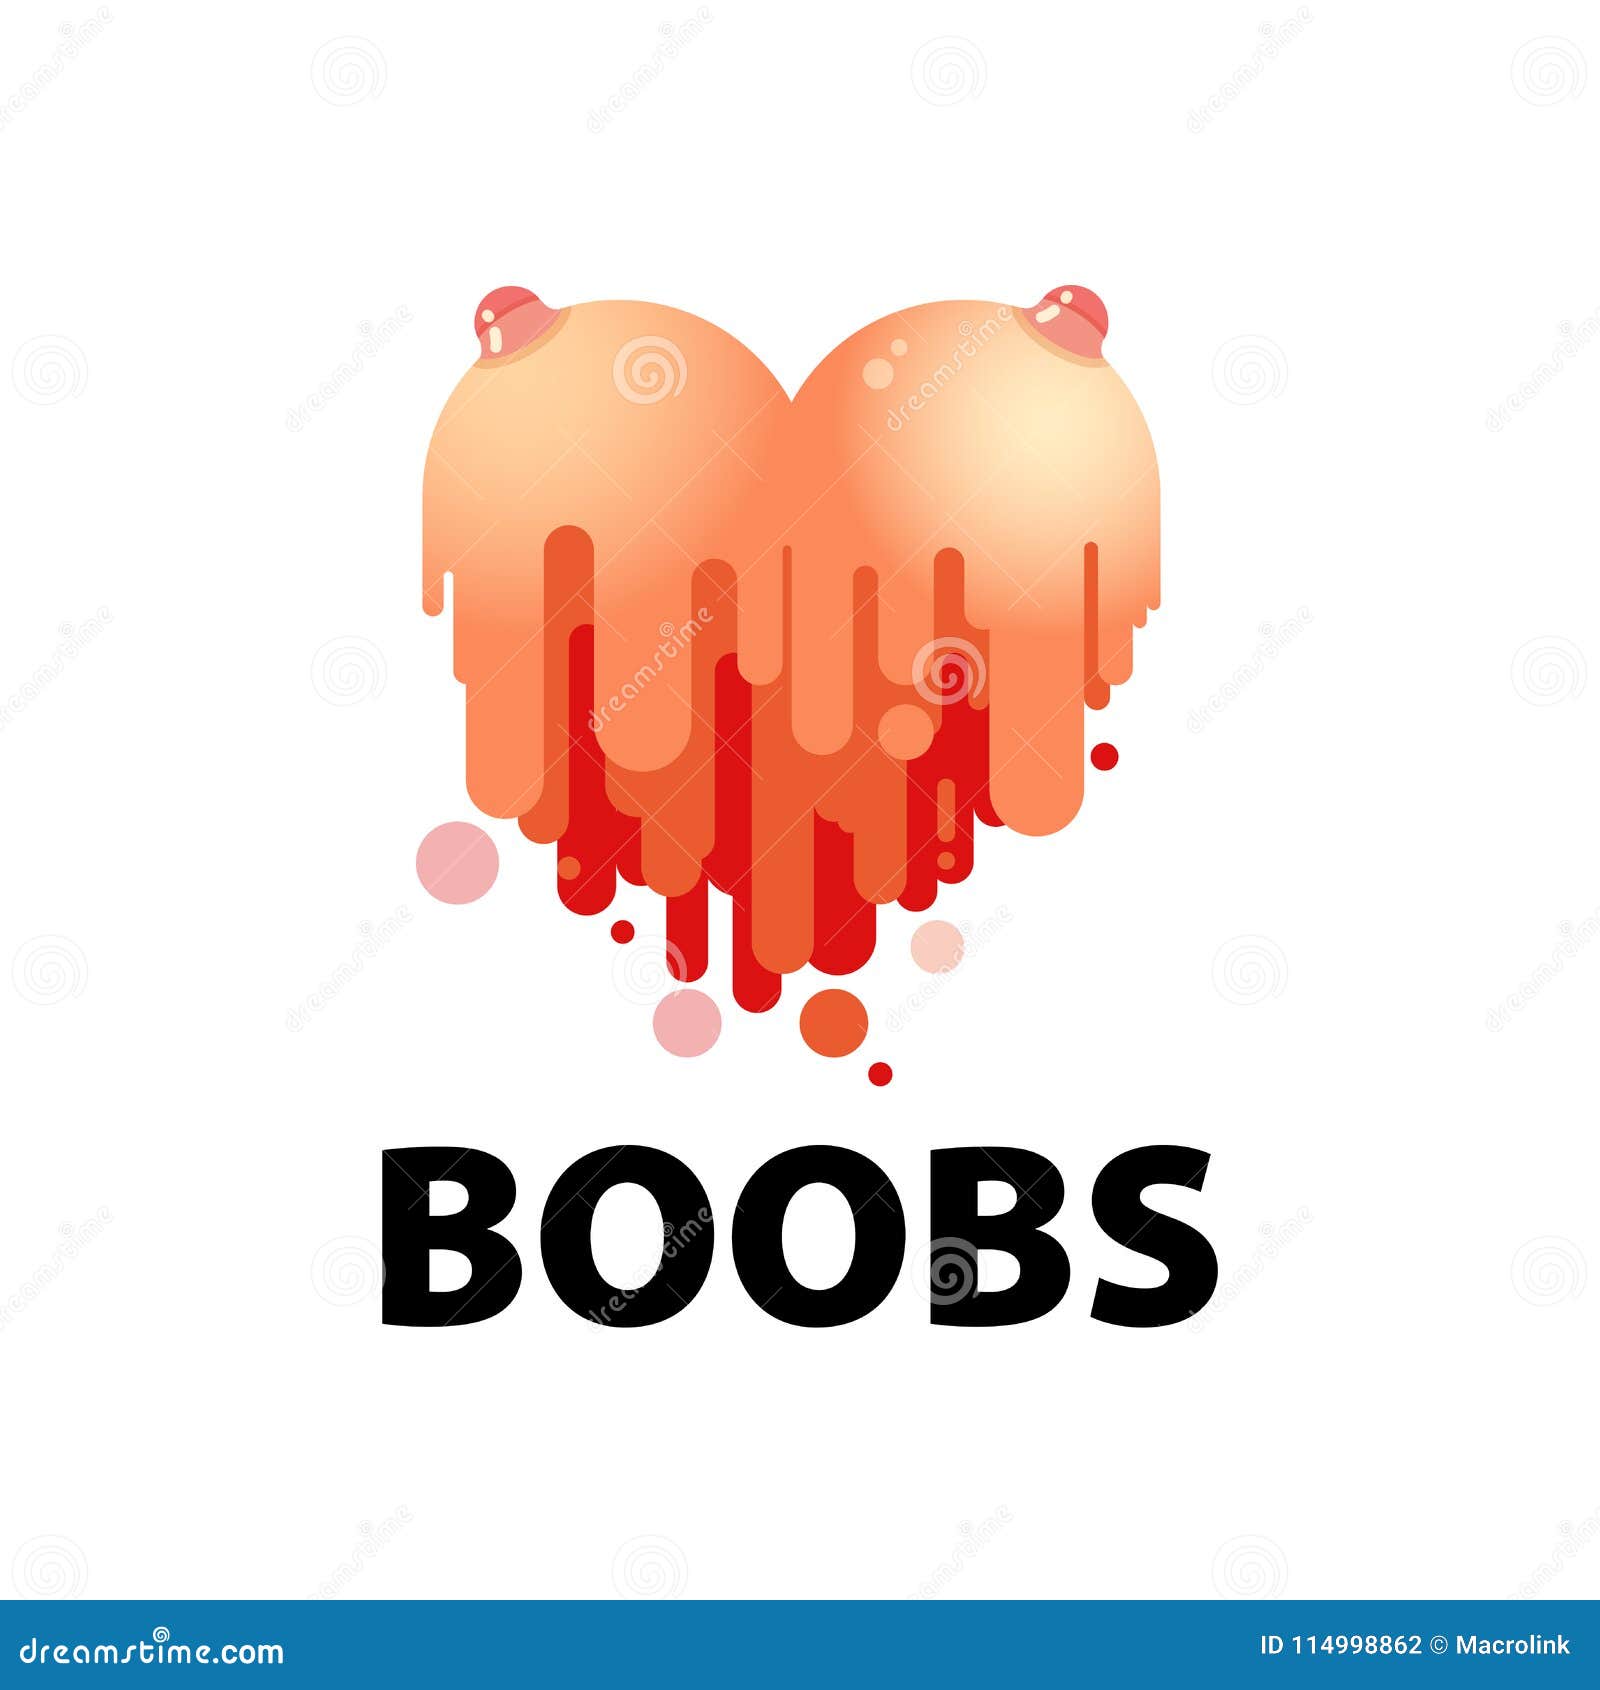 Logo with Hot Boobs for Company Making Adult Content - Emblem for Sex Shop or Web Site Isolated on White